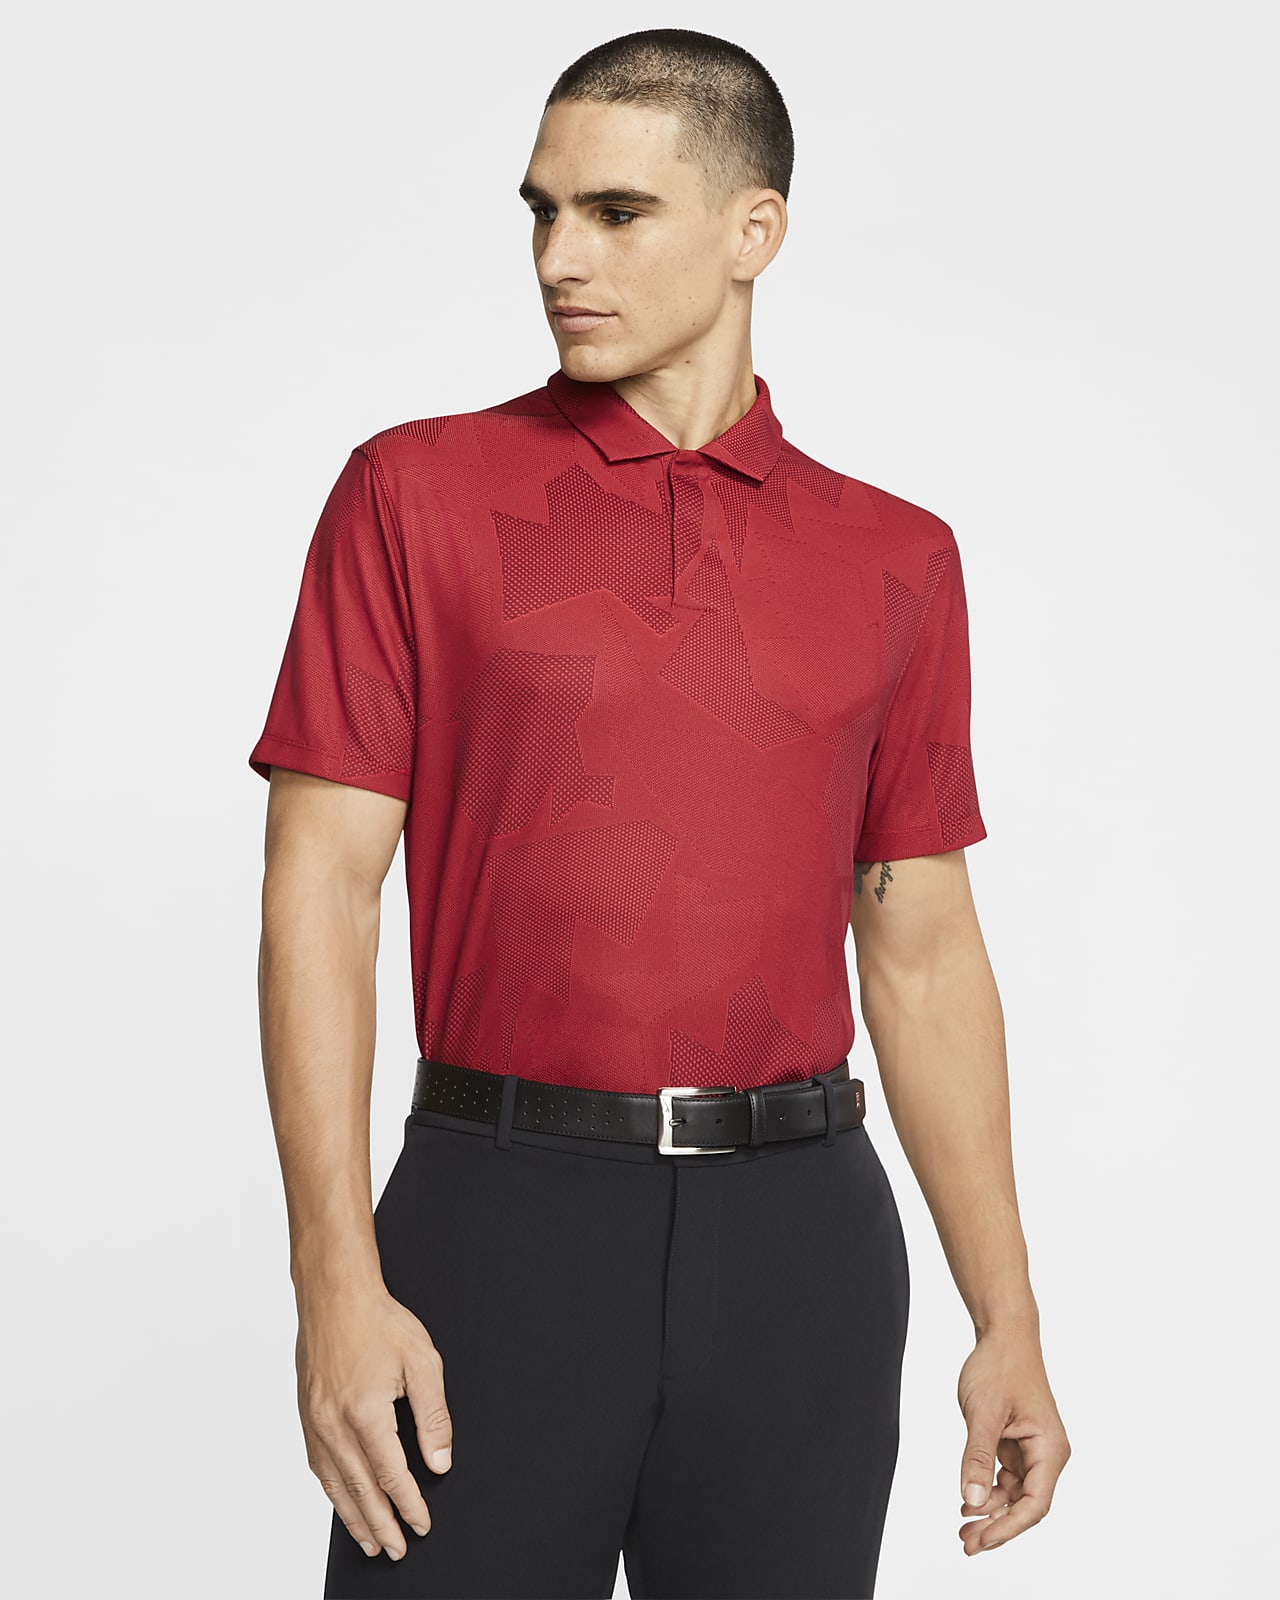 tiger woods red polo nike